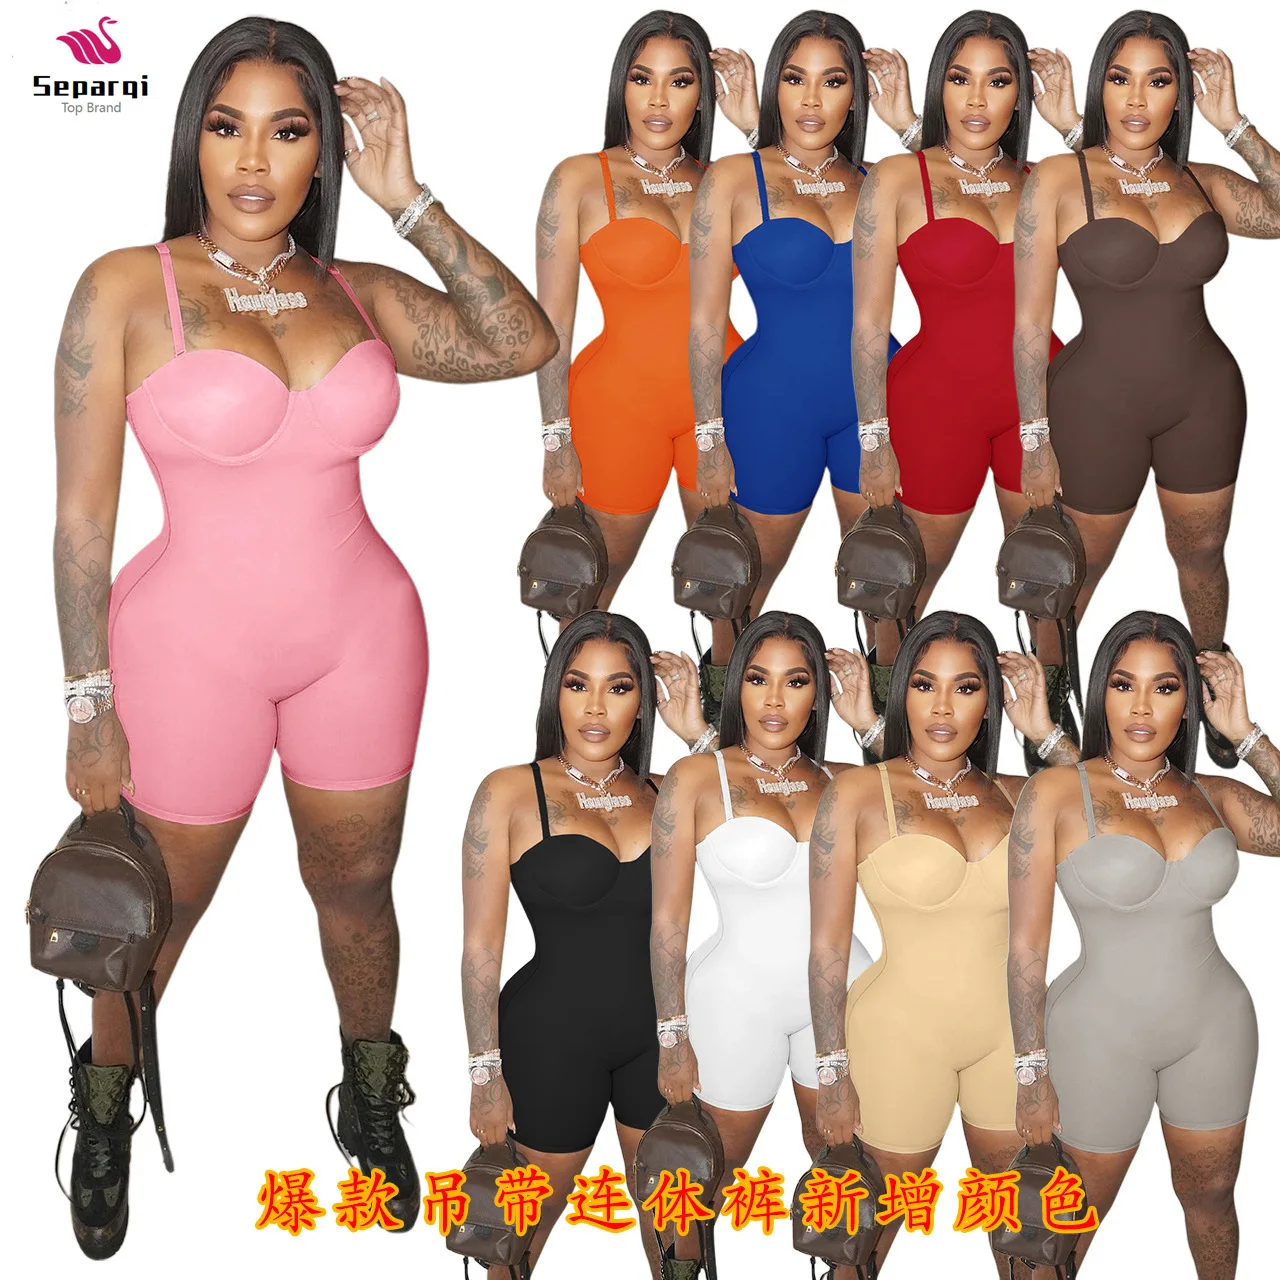 

SEPAQI Body-Shaping Rompers Women Popular Classy Sheath Slim Sexy Cleavage Party Playsuit Solid Strapless Camisole Clubwear Hot